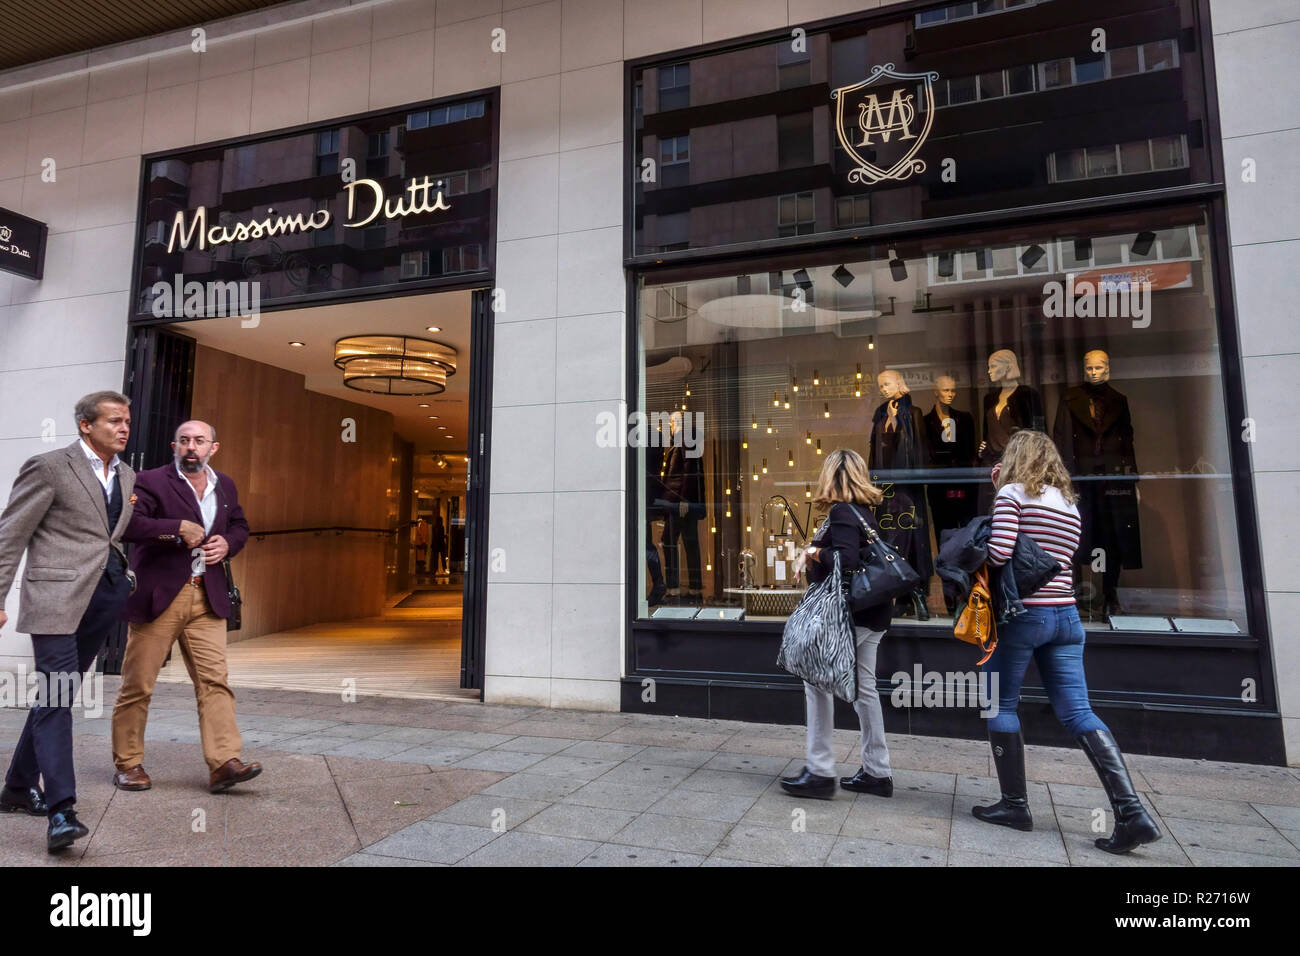 Massimo Dutti Shop High Resolution Stock Photography and Images - Alamy